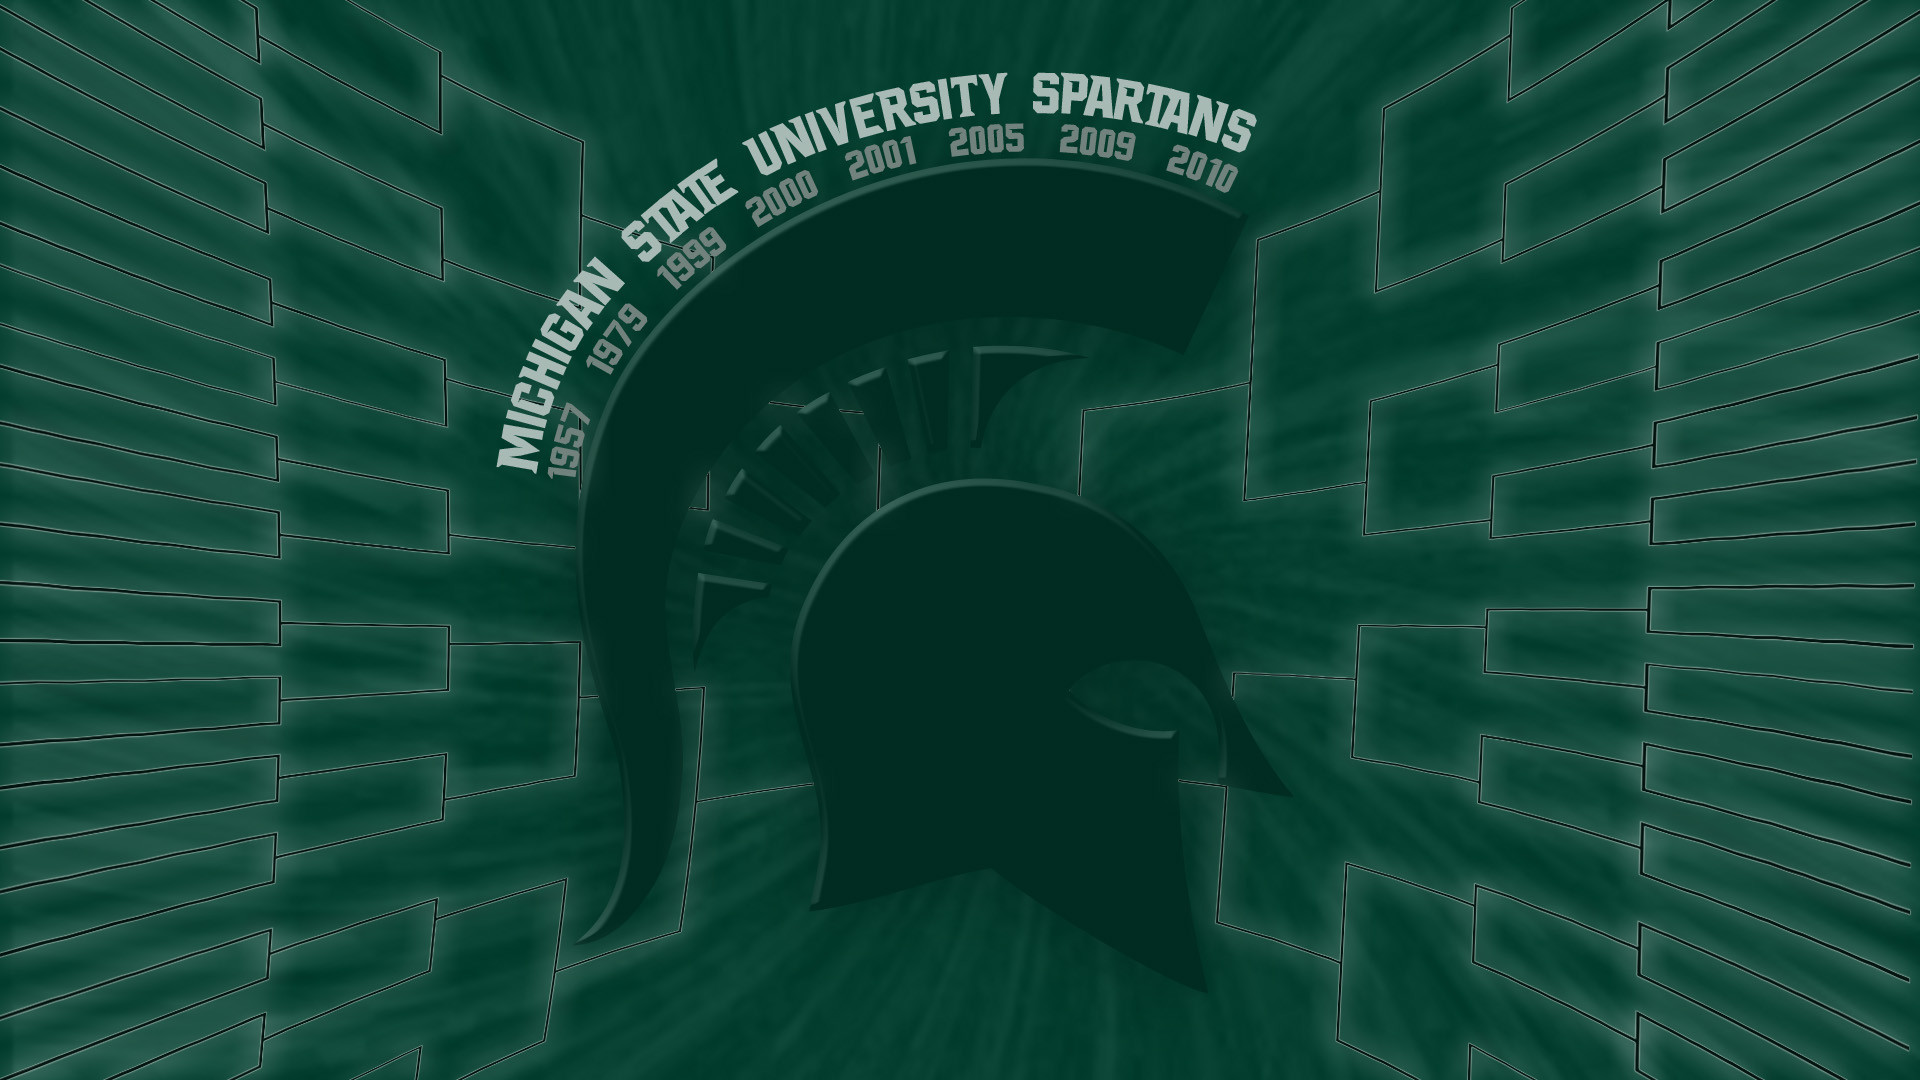 Download wallpapers Michigan State Spartans green background American  football team Michigan State Spartans emblem NCAA Michigan USA  American football Michigan State Spartans logo for desktop free Pictures  for desktop free